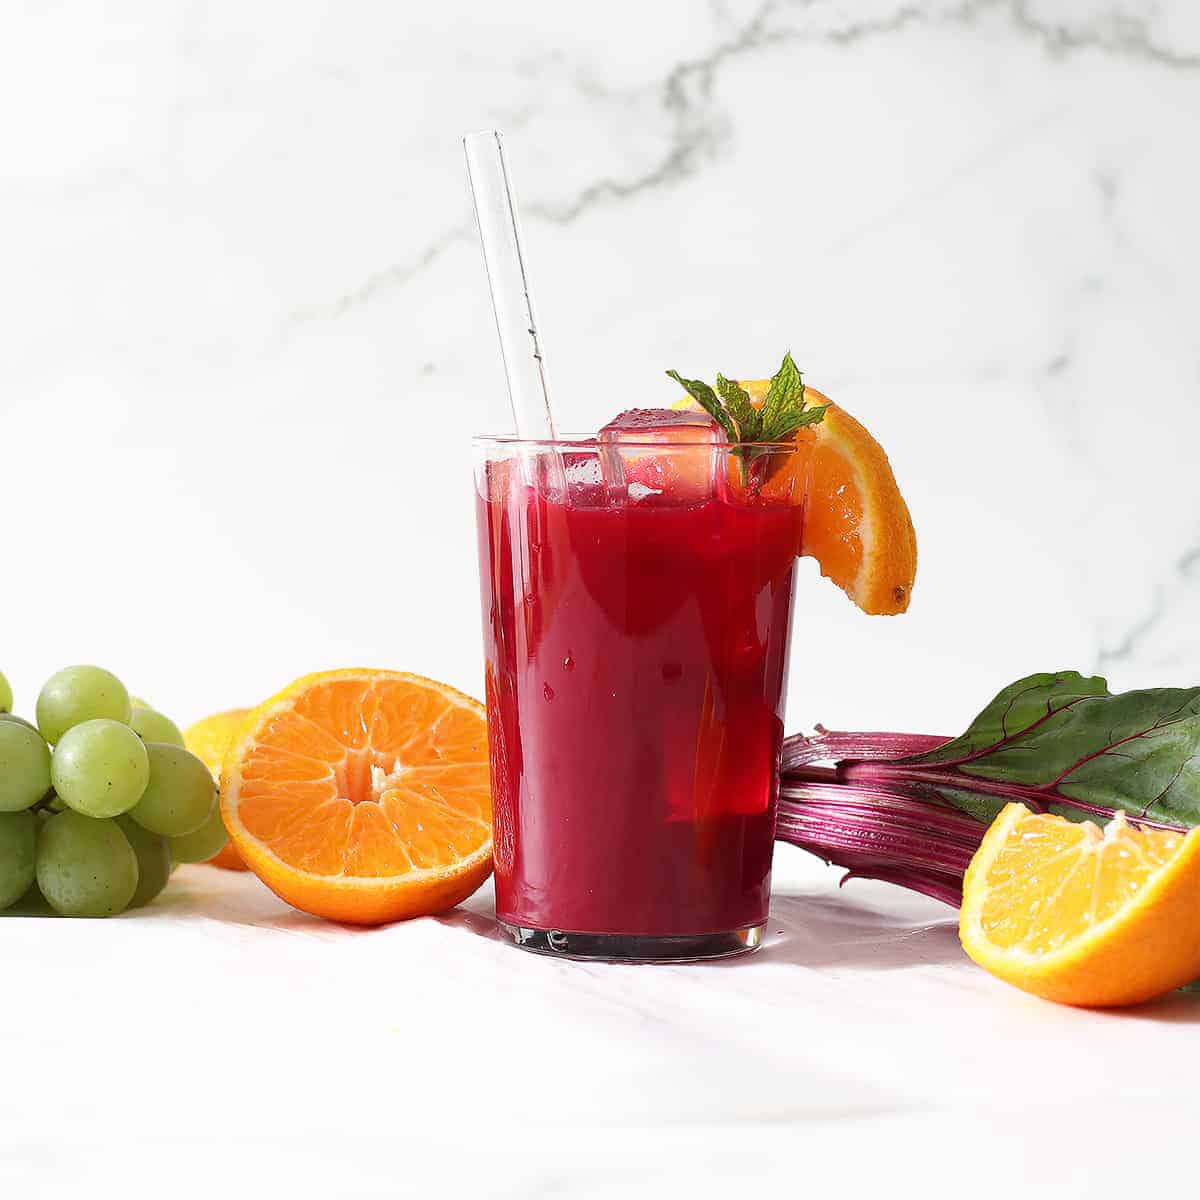 beet juice in a glass with a glass straw and orange slice.